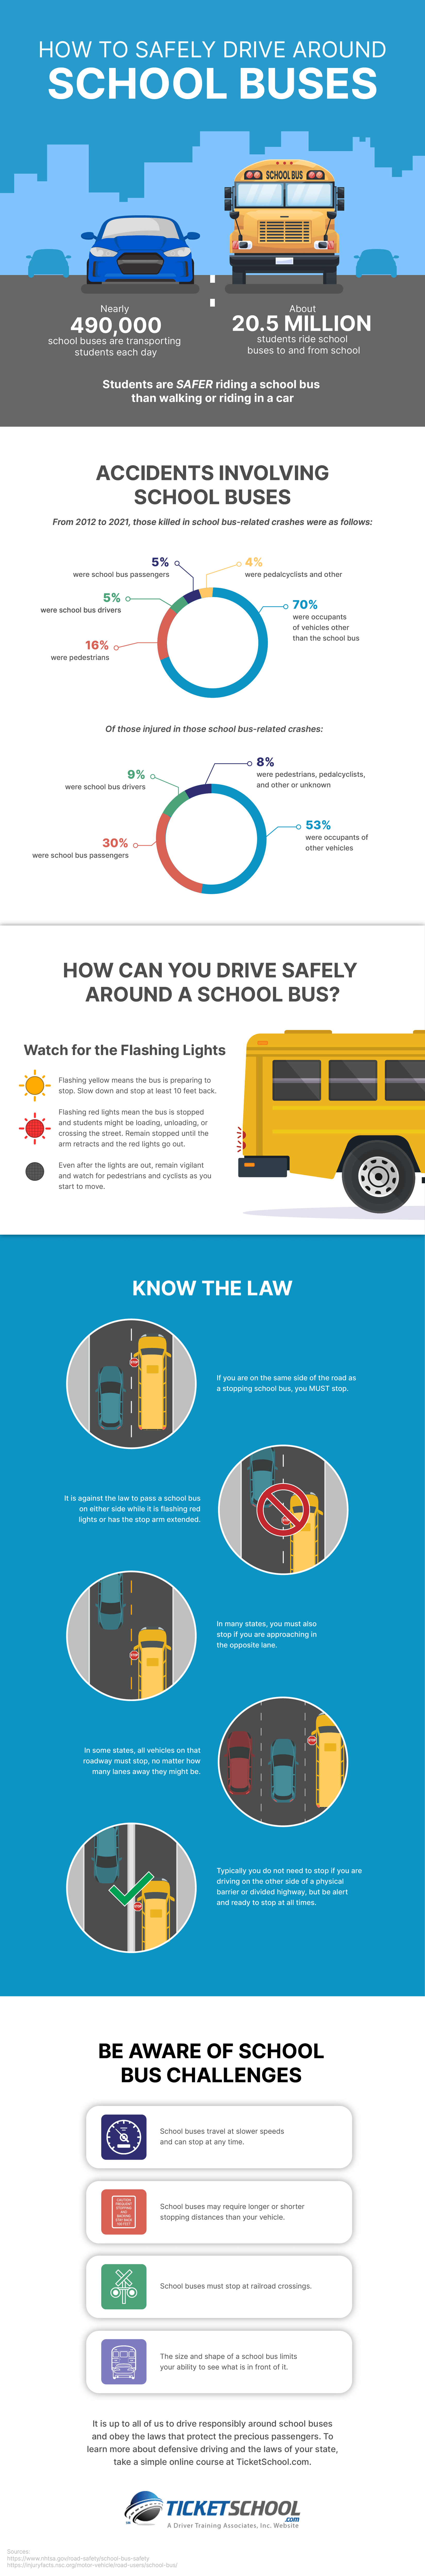 How to Safely Drive Around School Buses Infographic